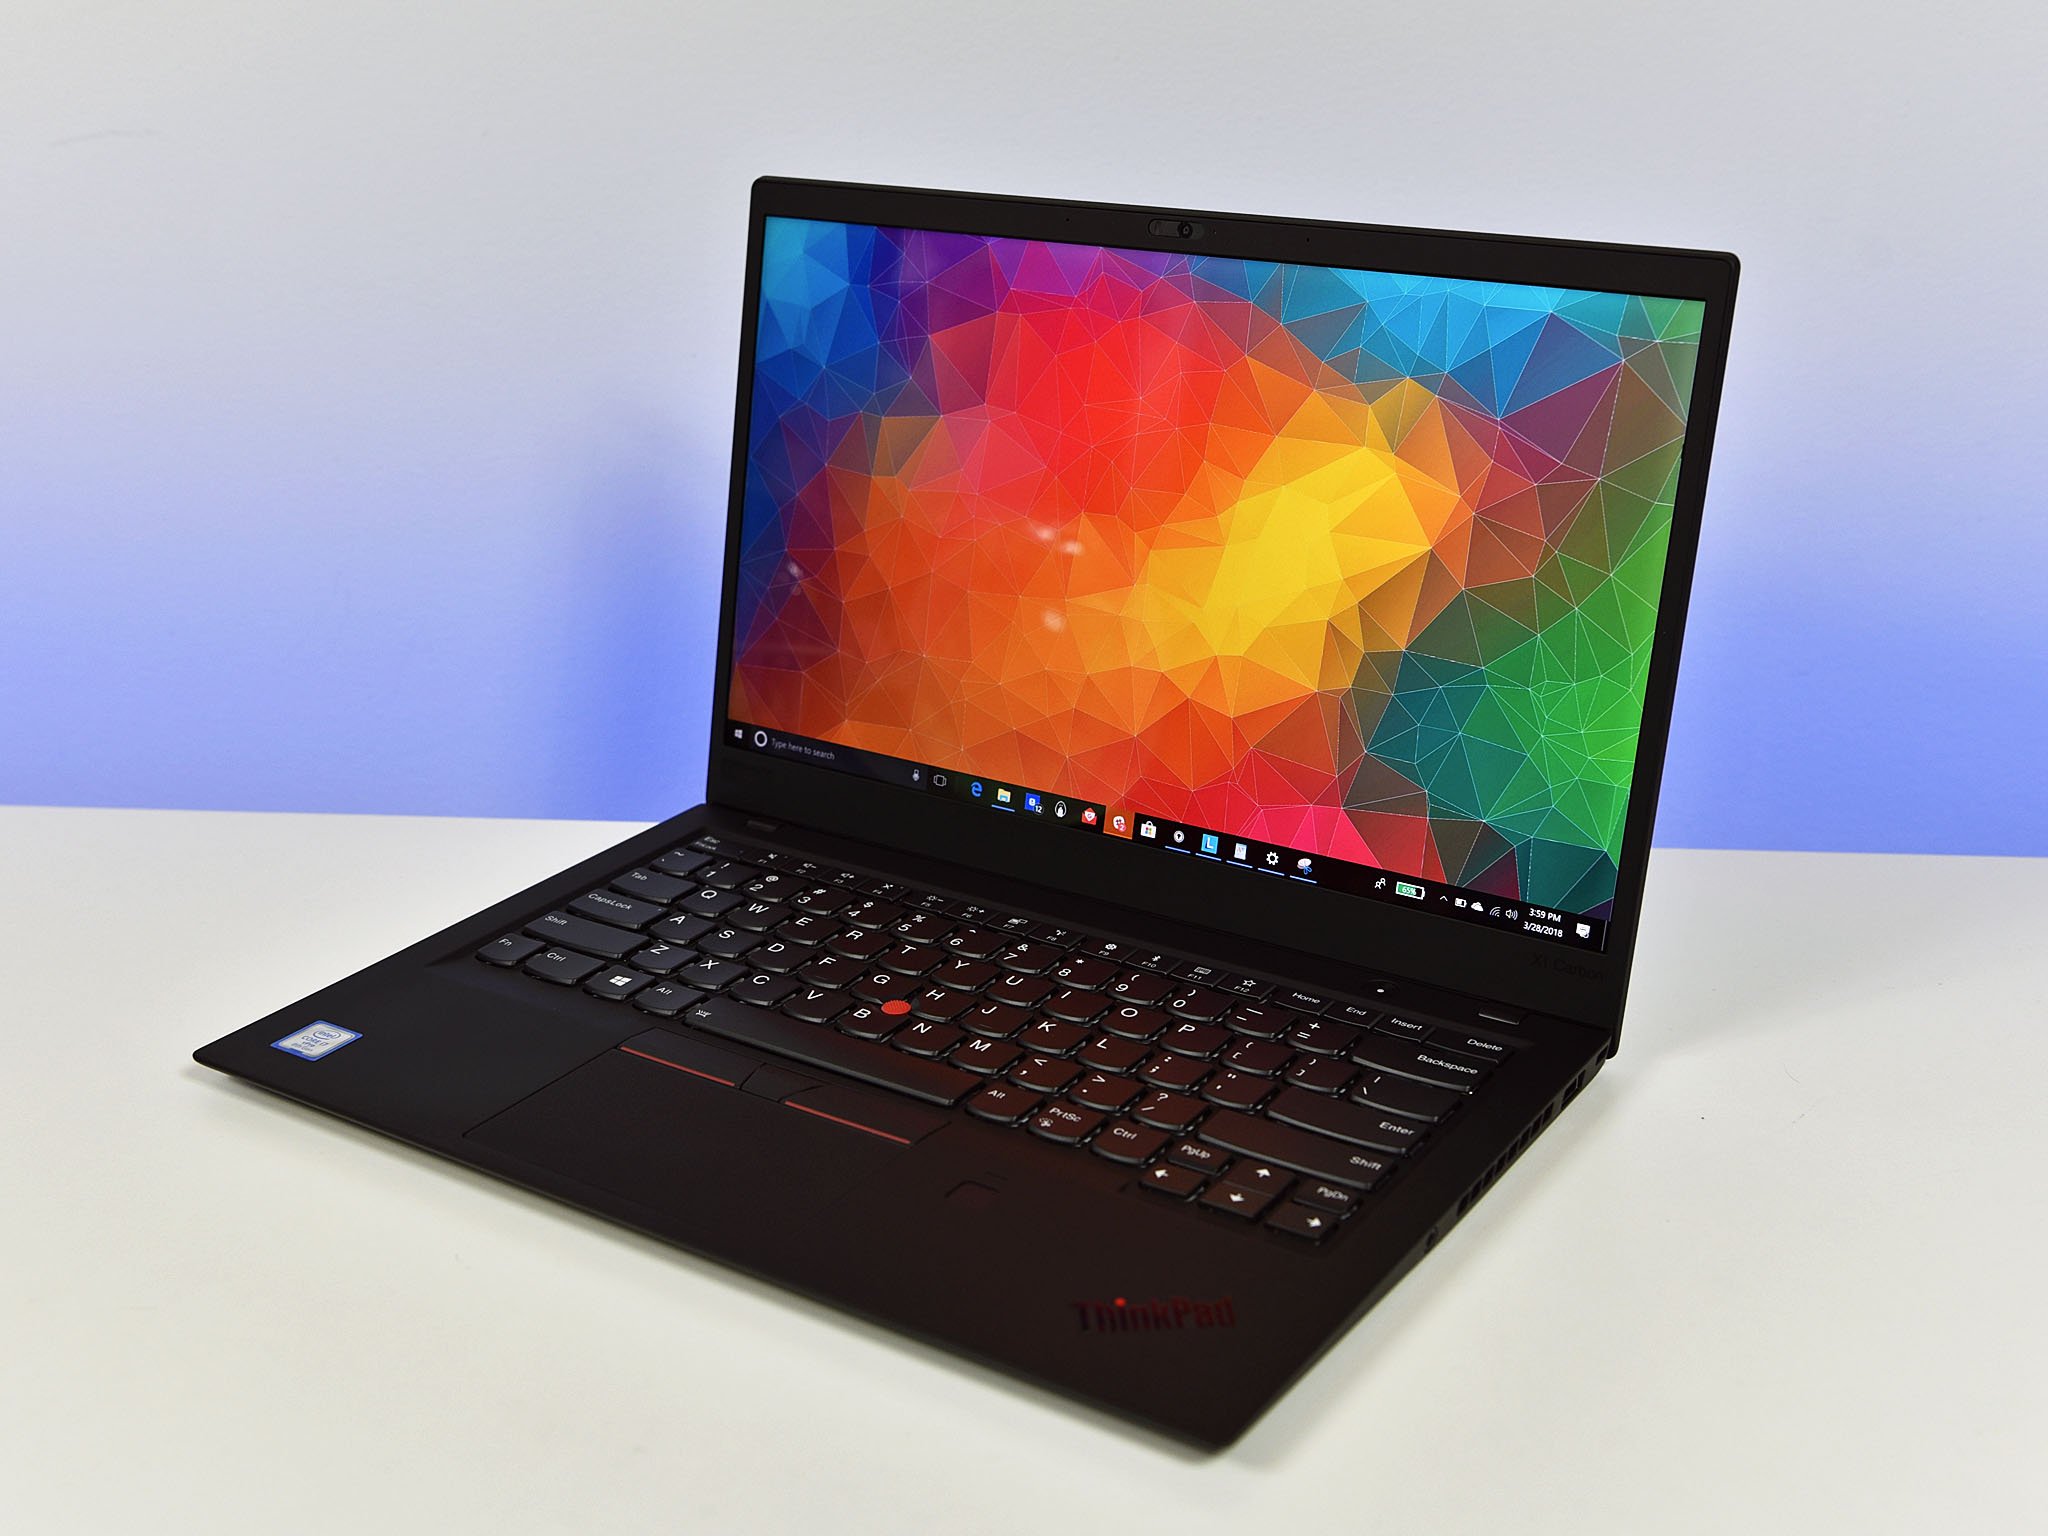 Lenovo X1 Carbon (2018) [Review]: A Nearly Perfect Laptop 